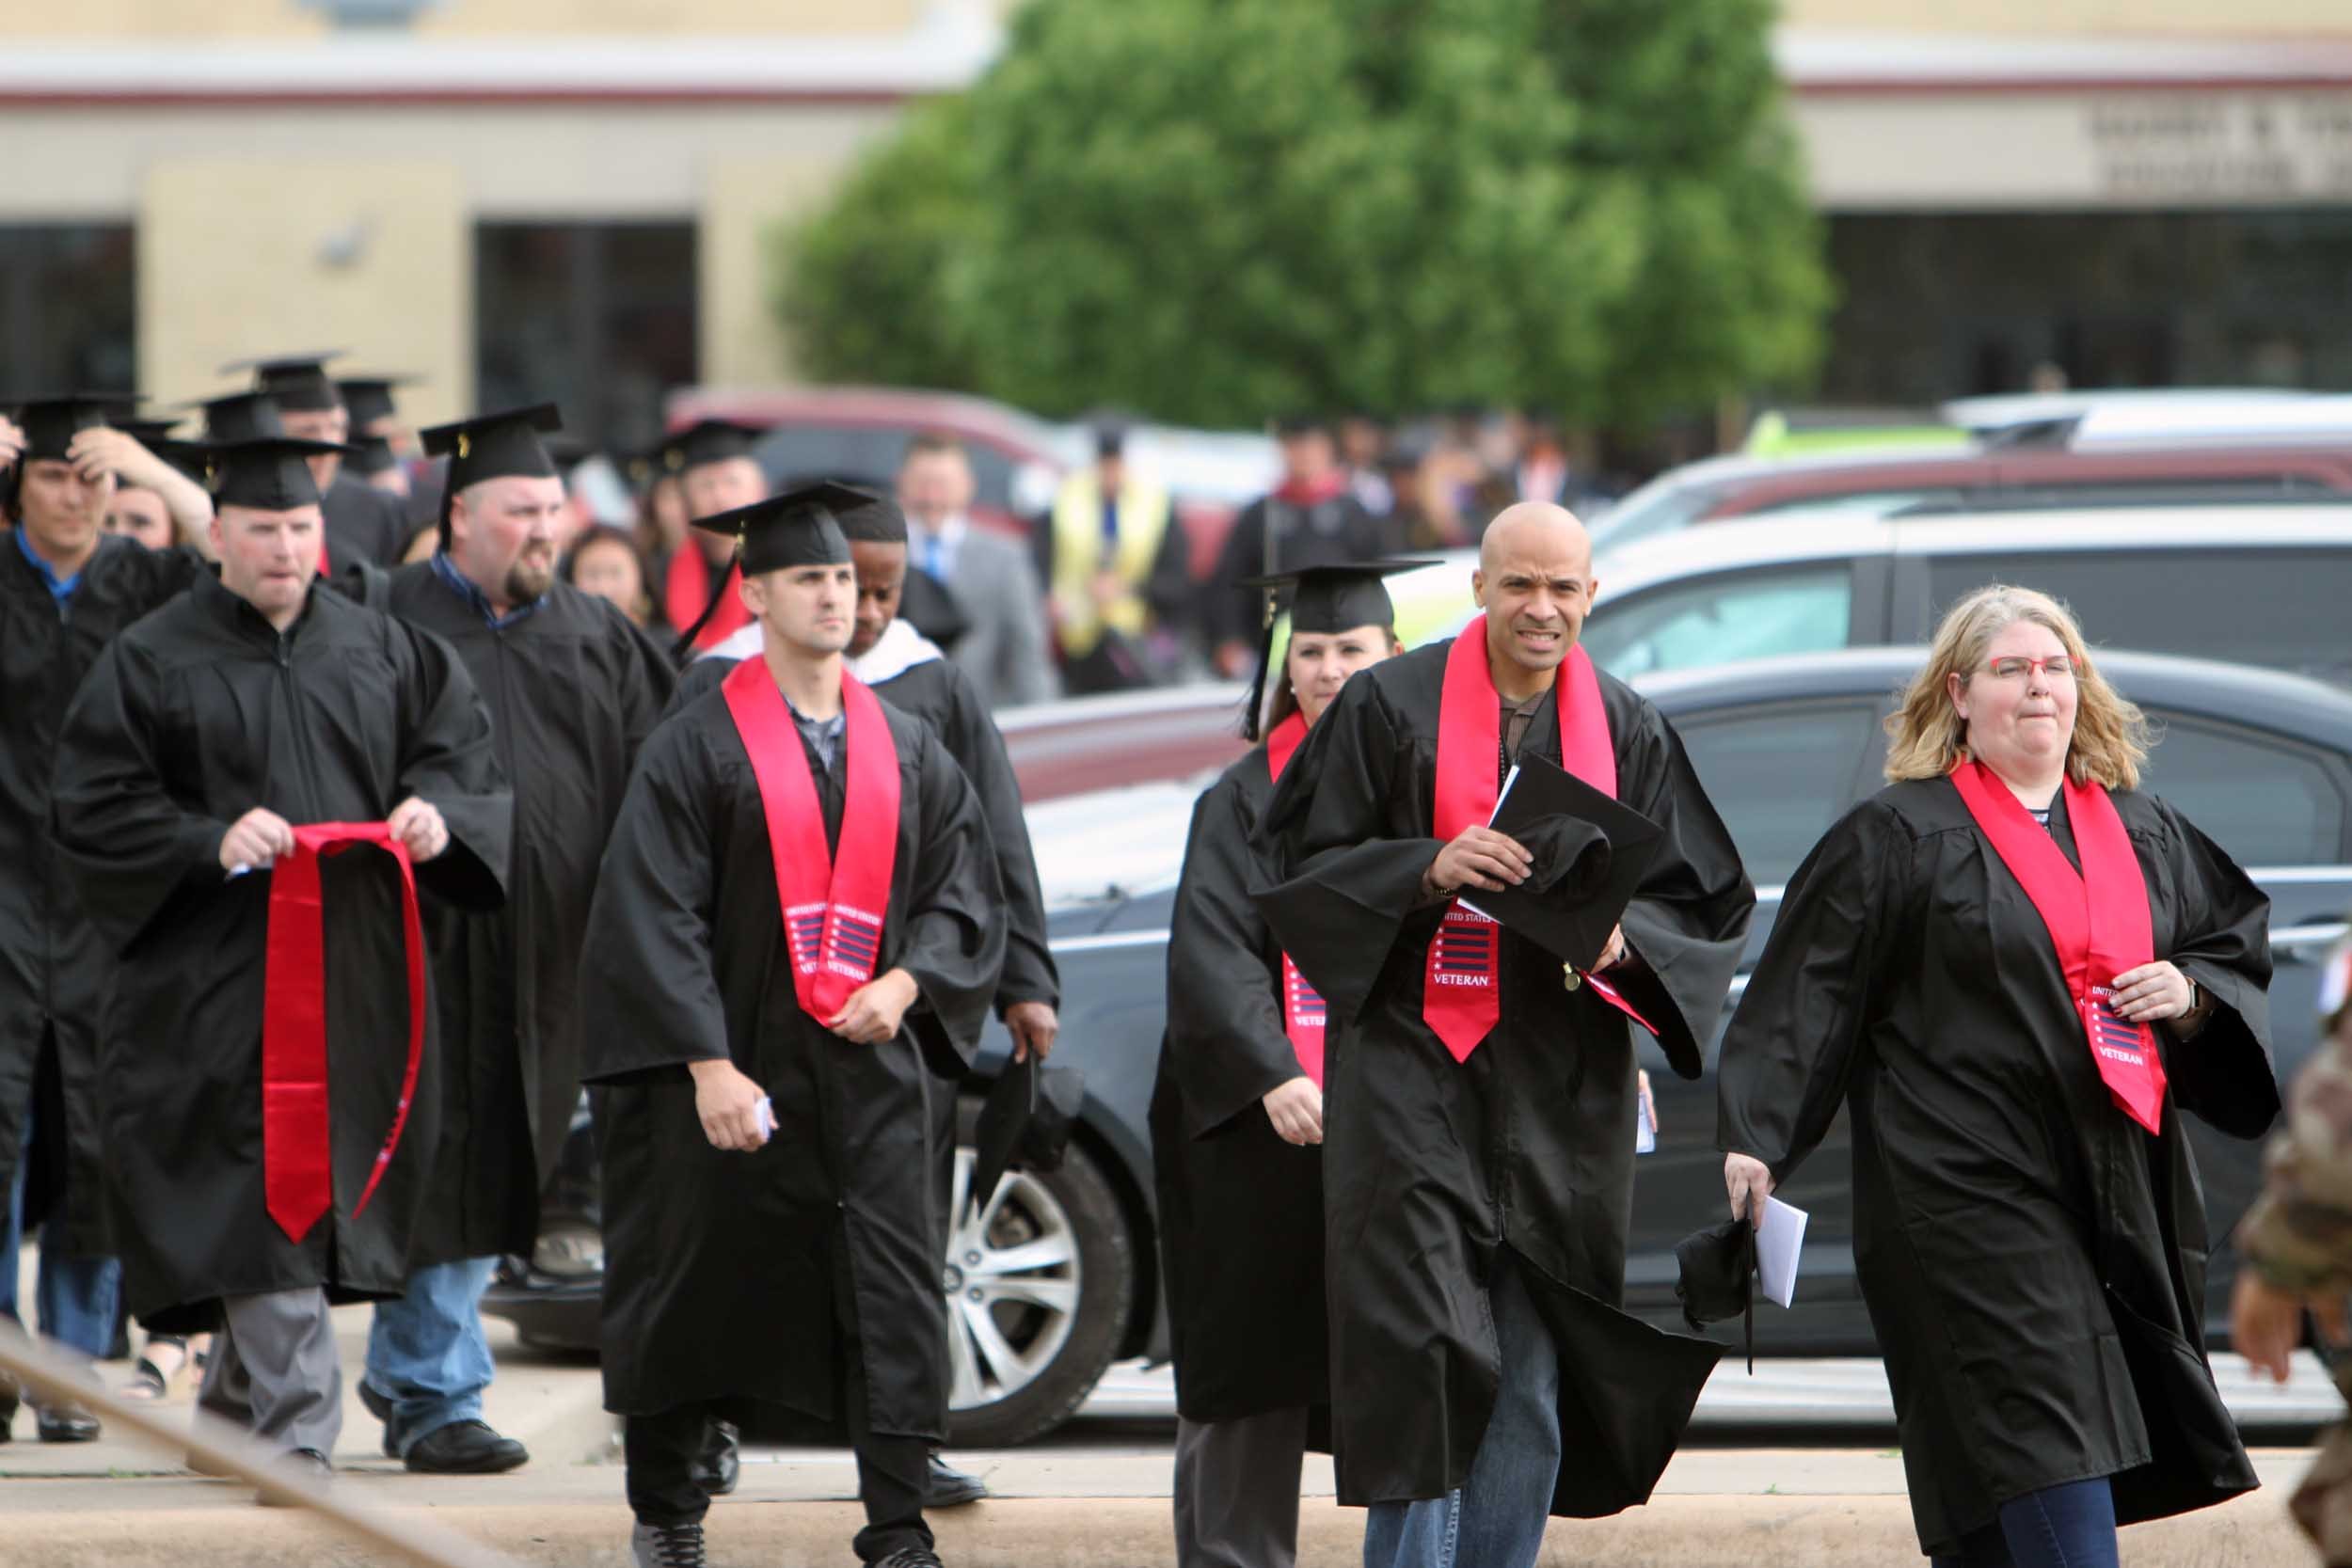 Fort Sill Army Education Center conducts multischool commencement